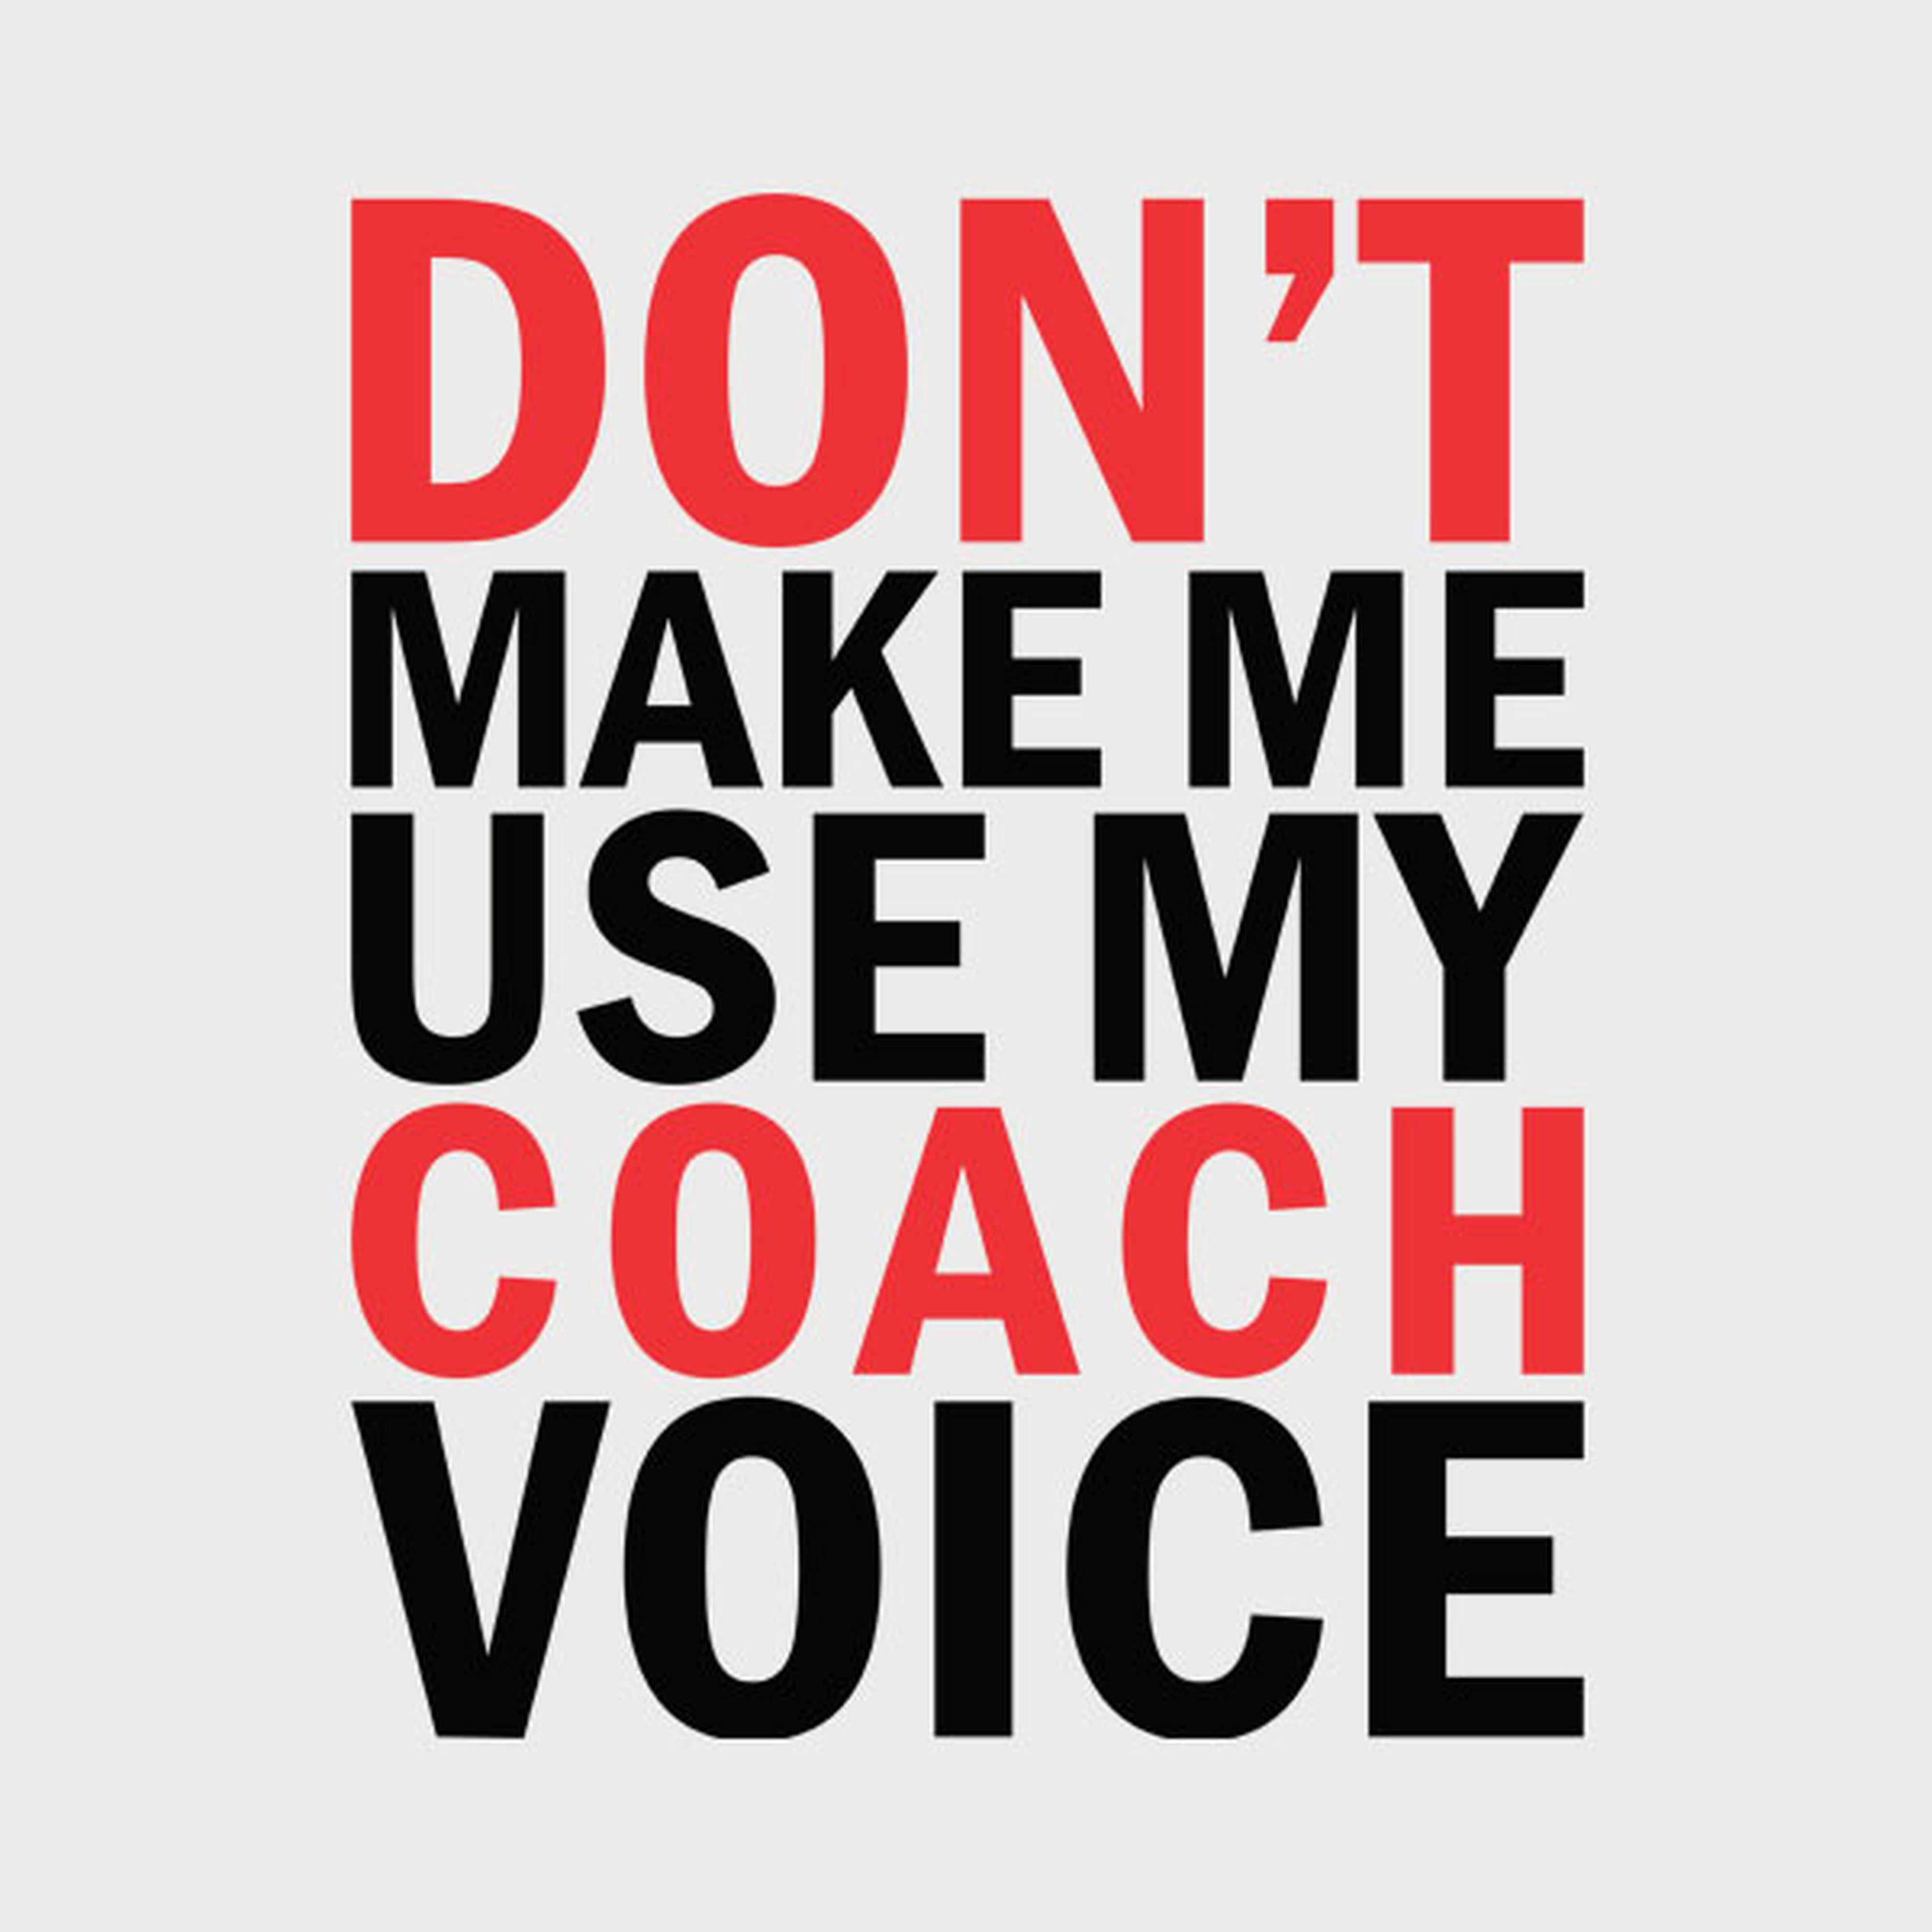 Don't make me use my COACH voice